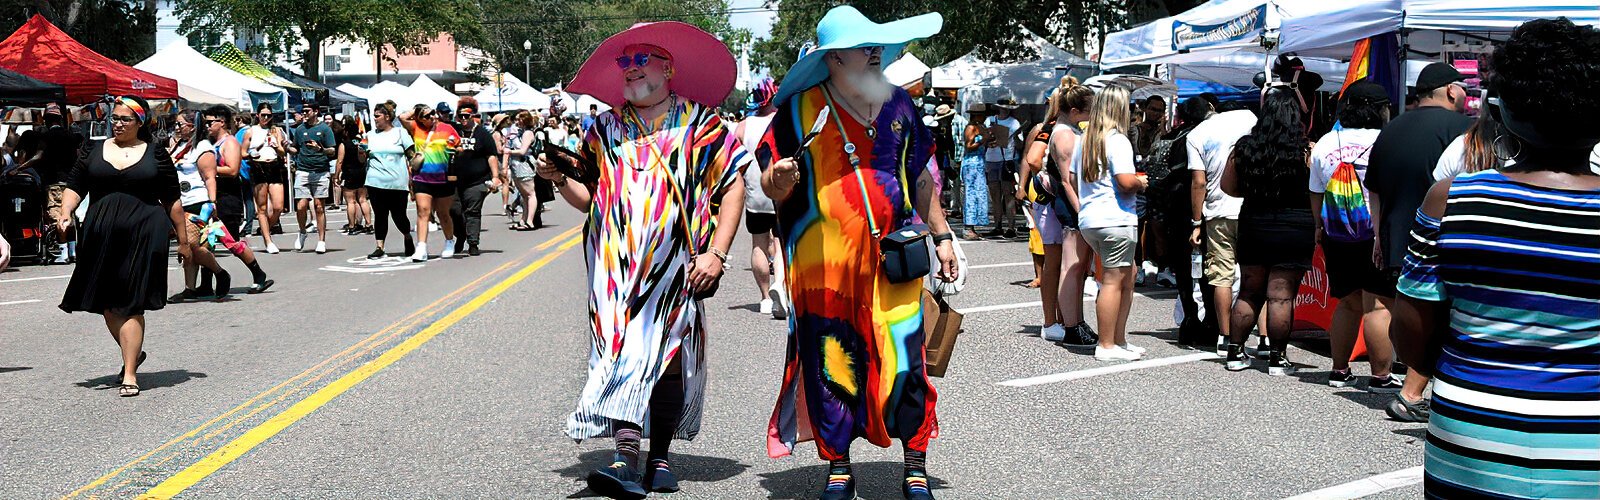 Shaded by their large hats, two festival-goers show off their pride as they wander down Central Avenue during the St. Pete Pride street festival, which had a carnival theme this year.